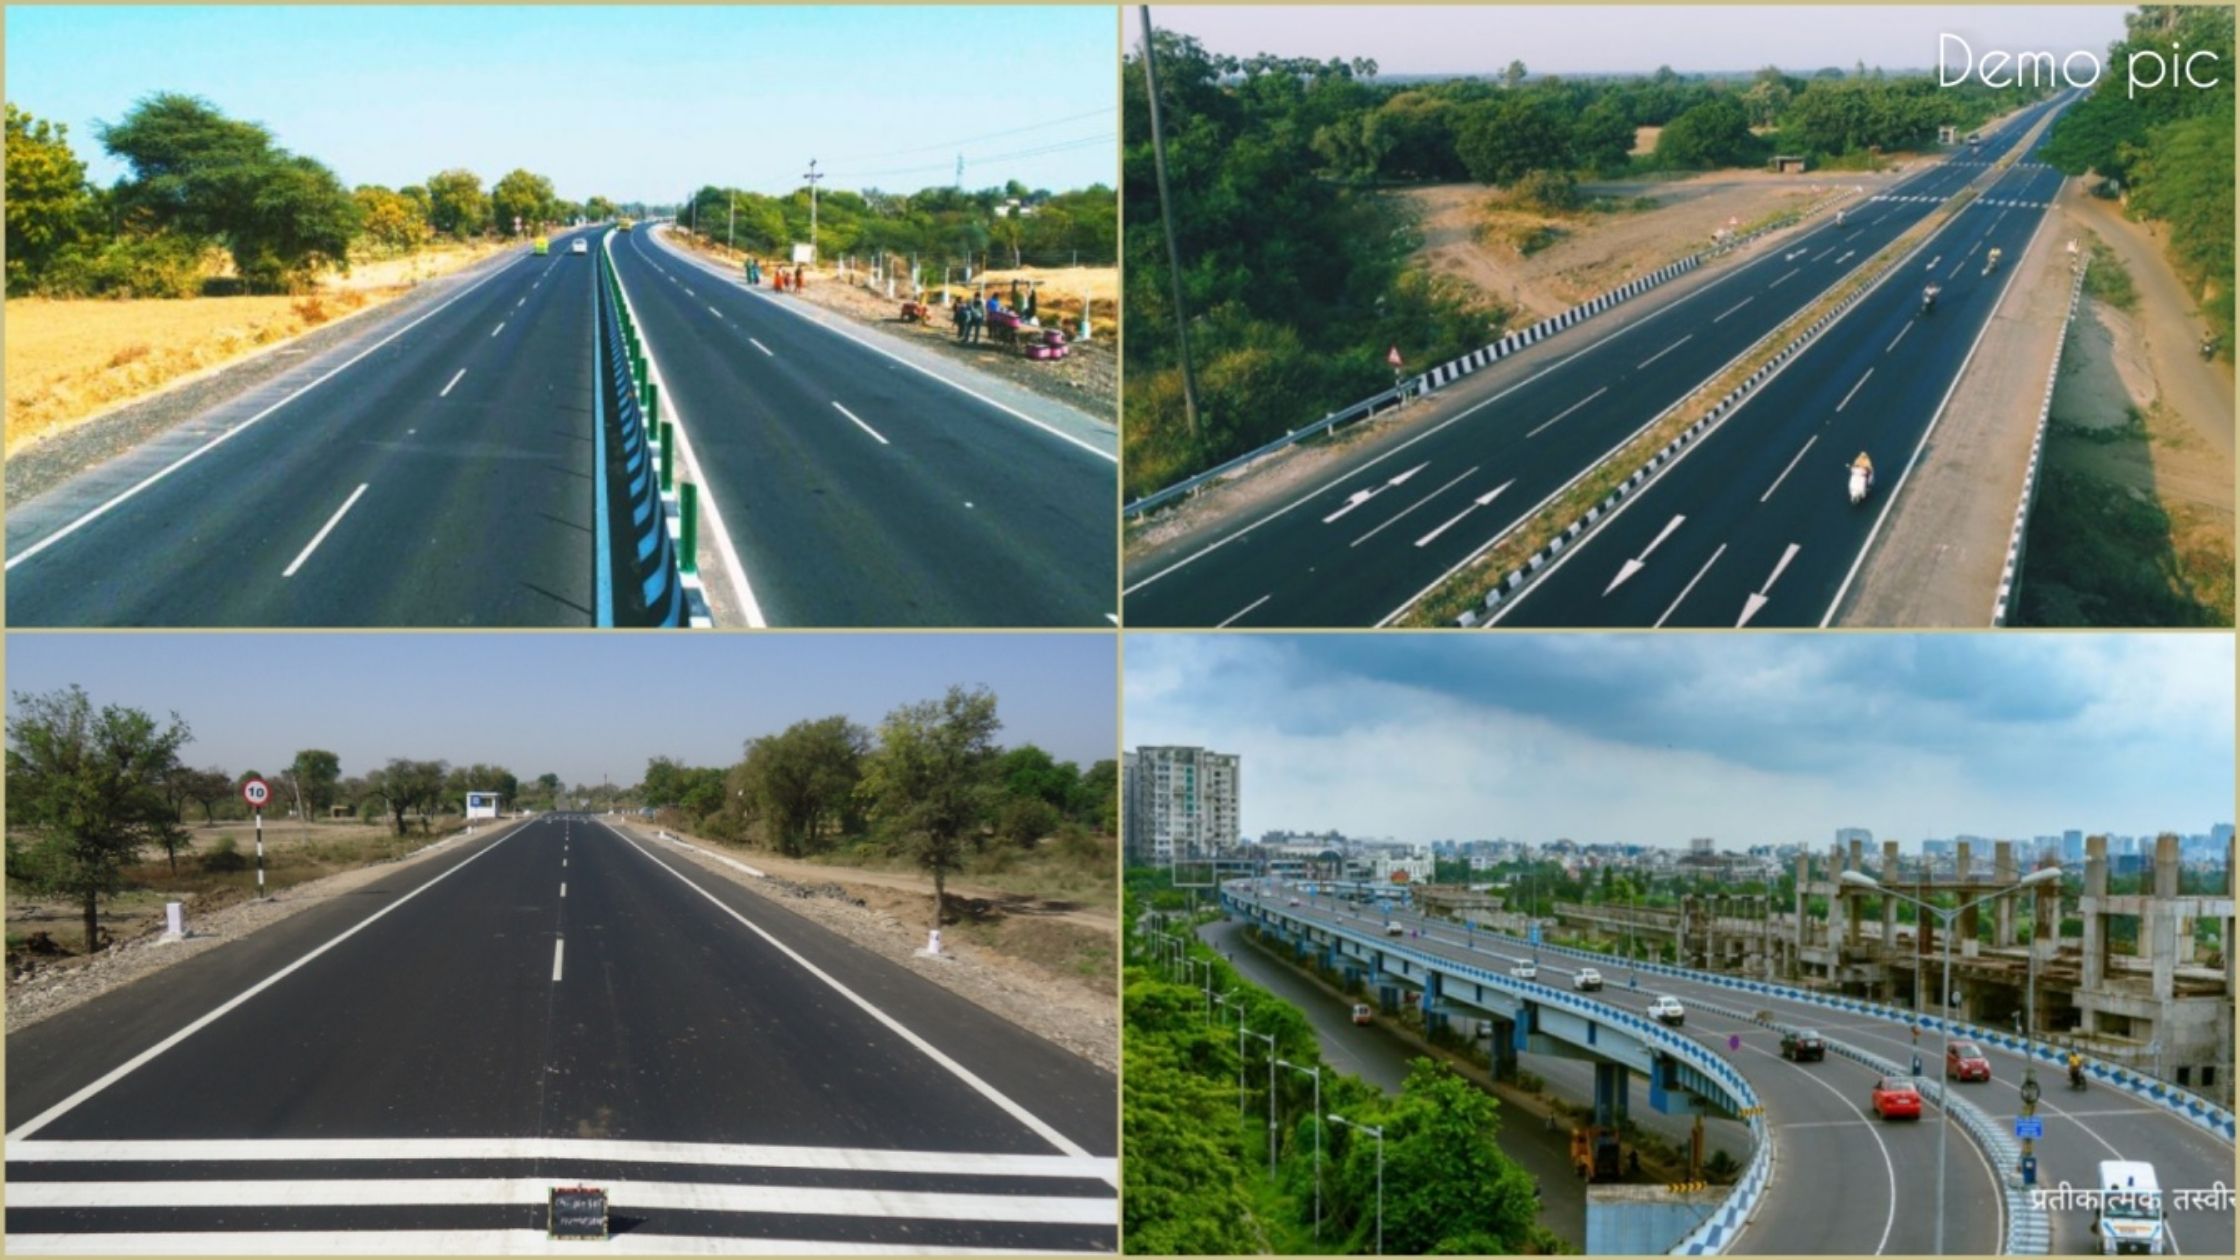 This district of Bihar is becoming the junction of 6 national highways